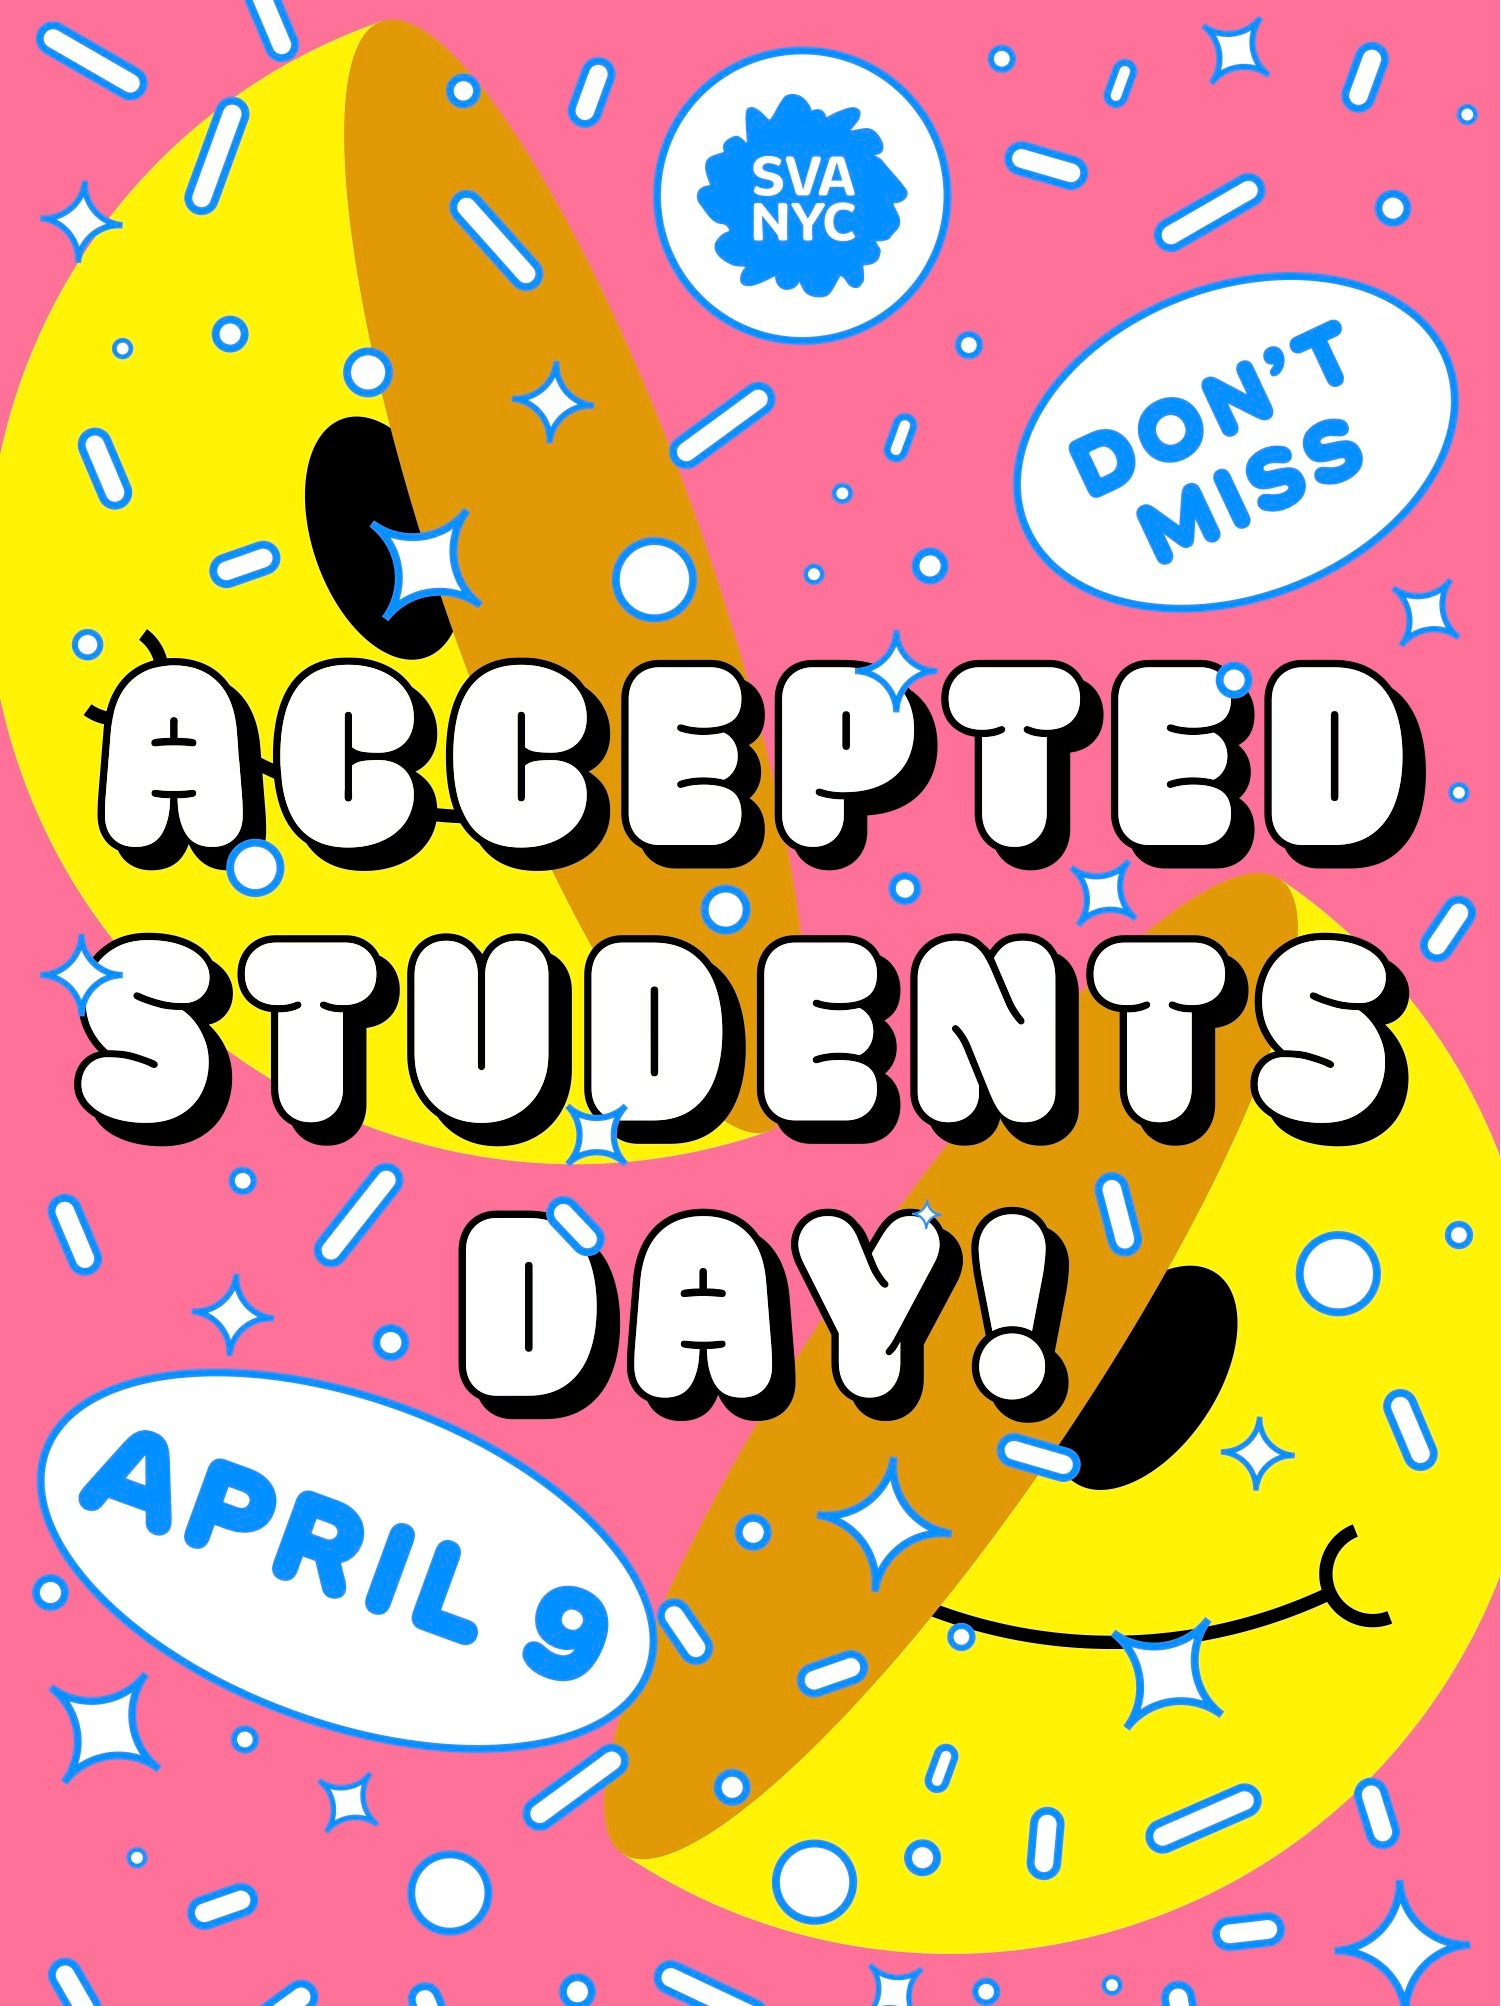 Accepted Students Day is coming soon register to meet us in person at